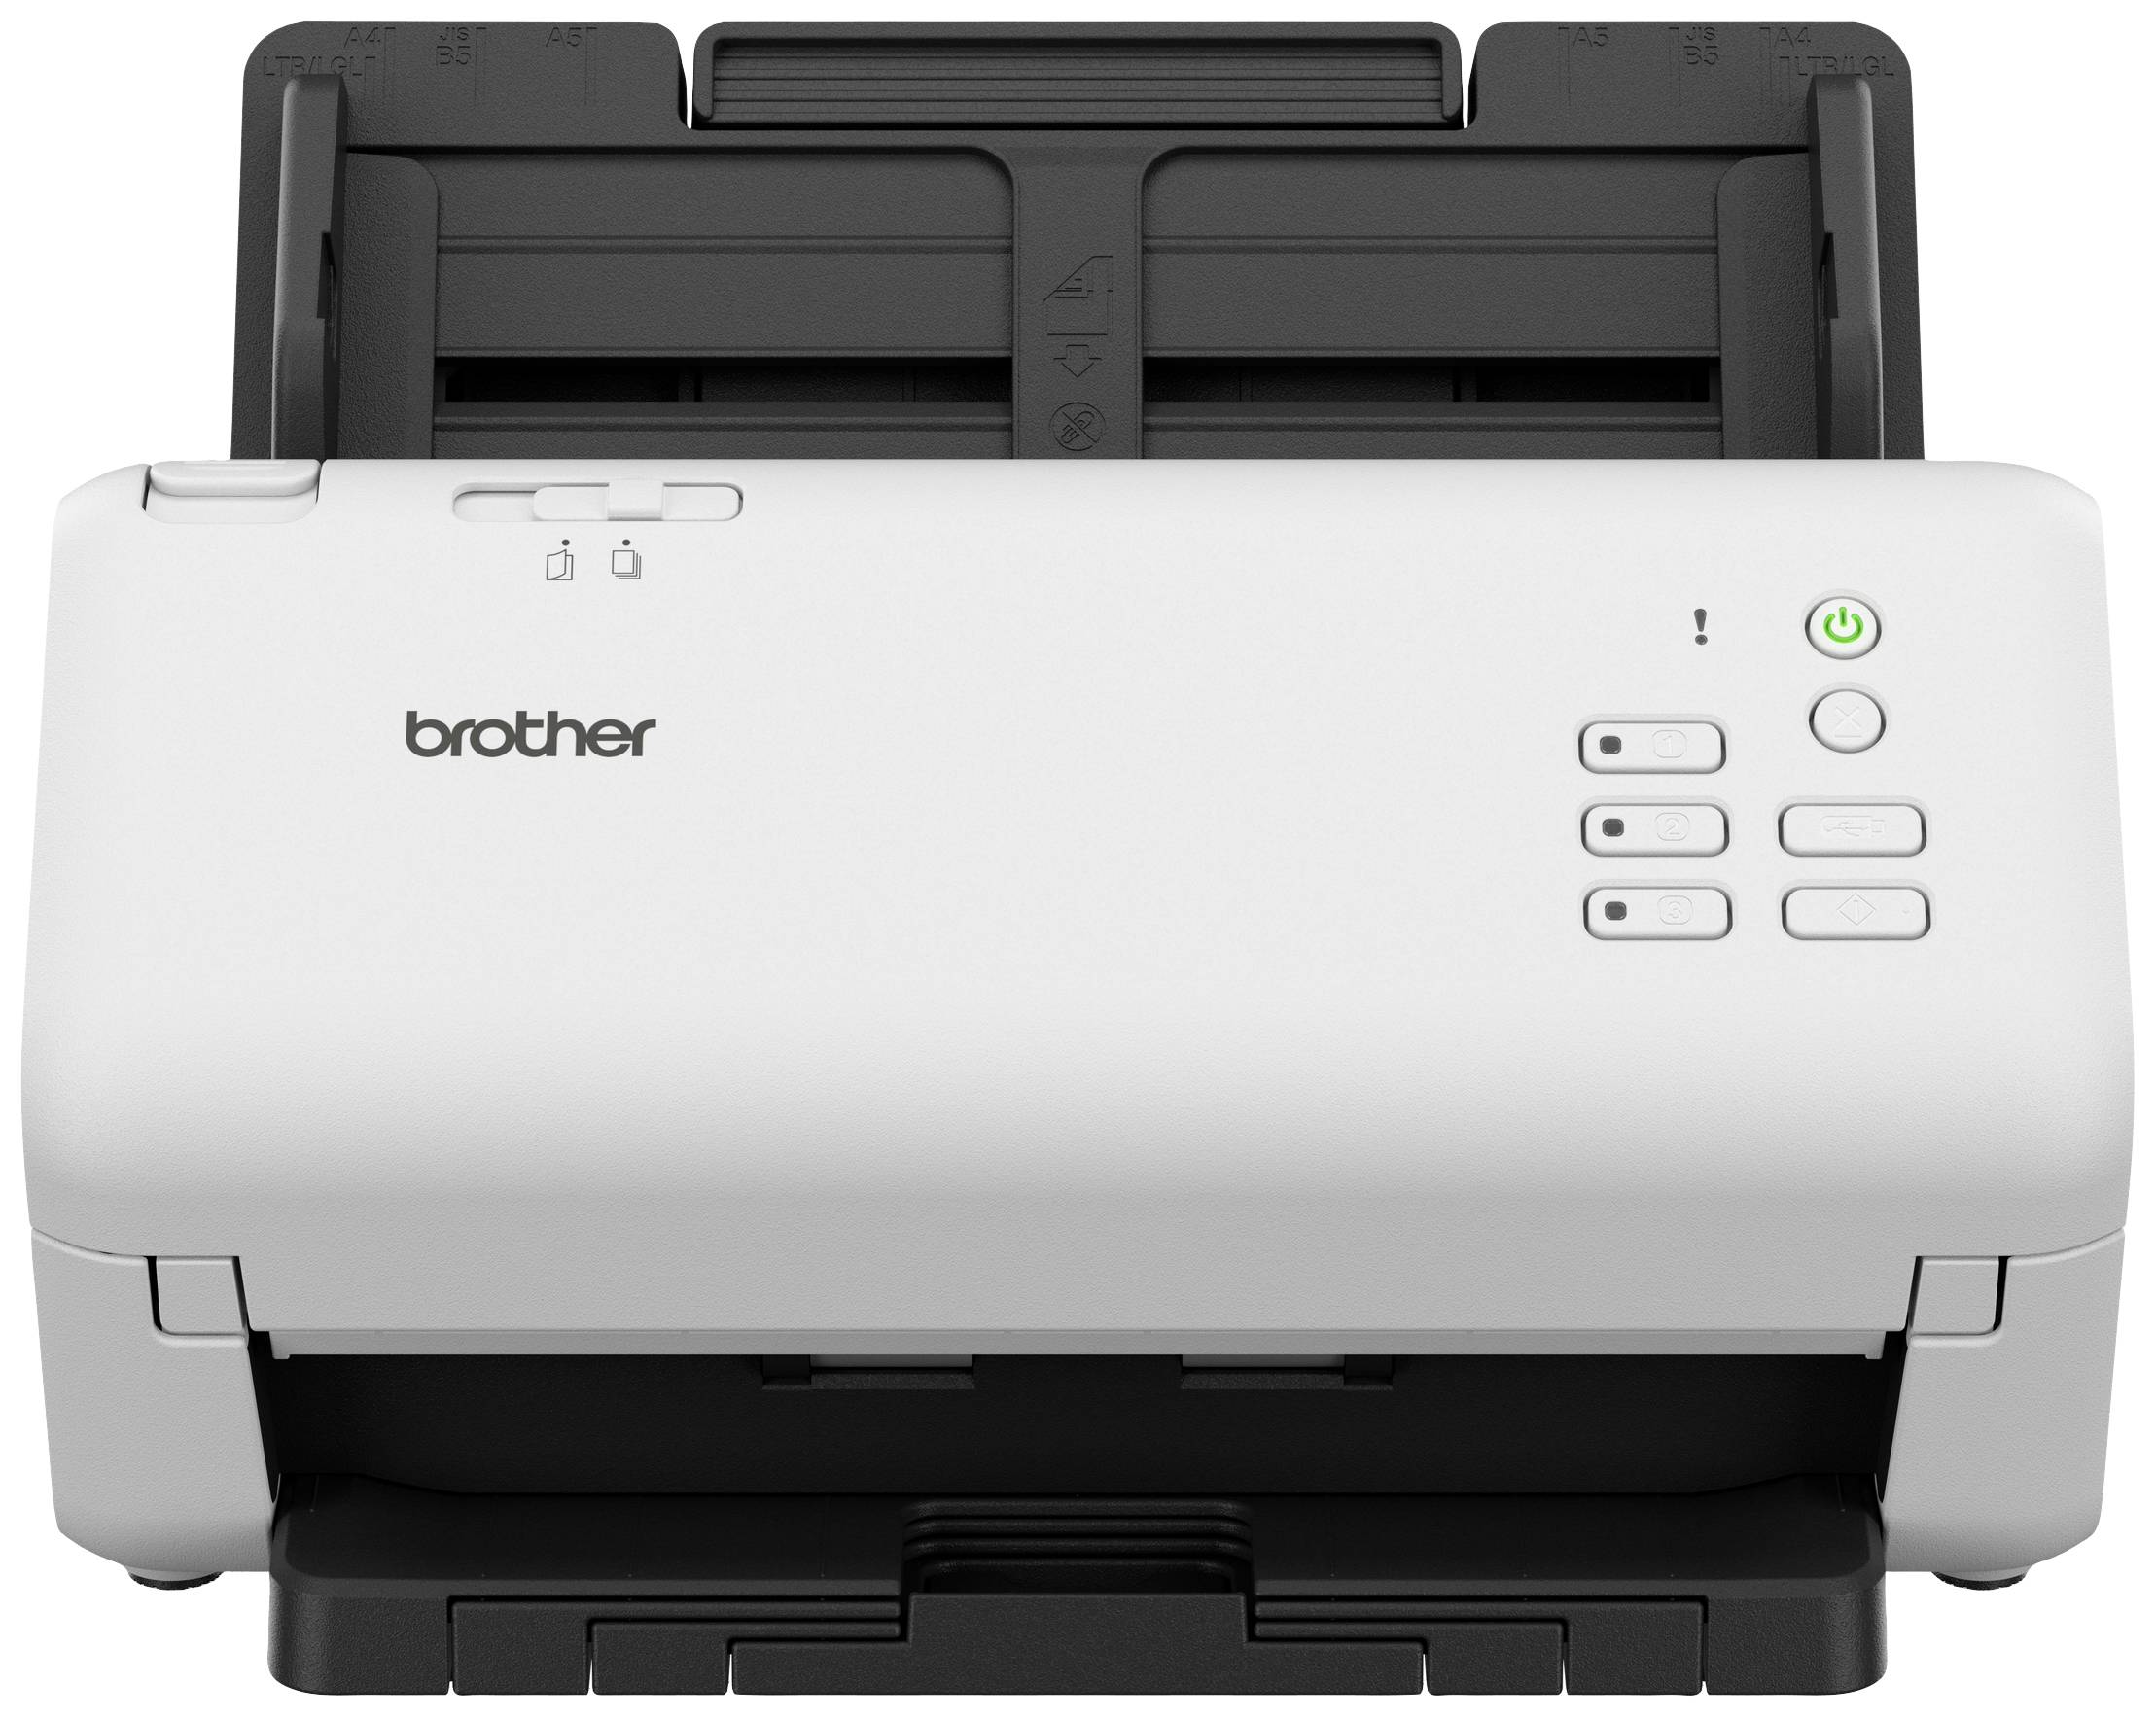 BROTHER ADS-4300N